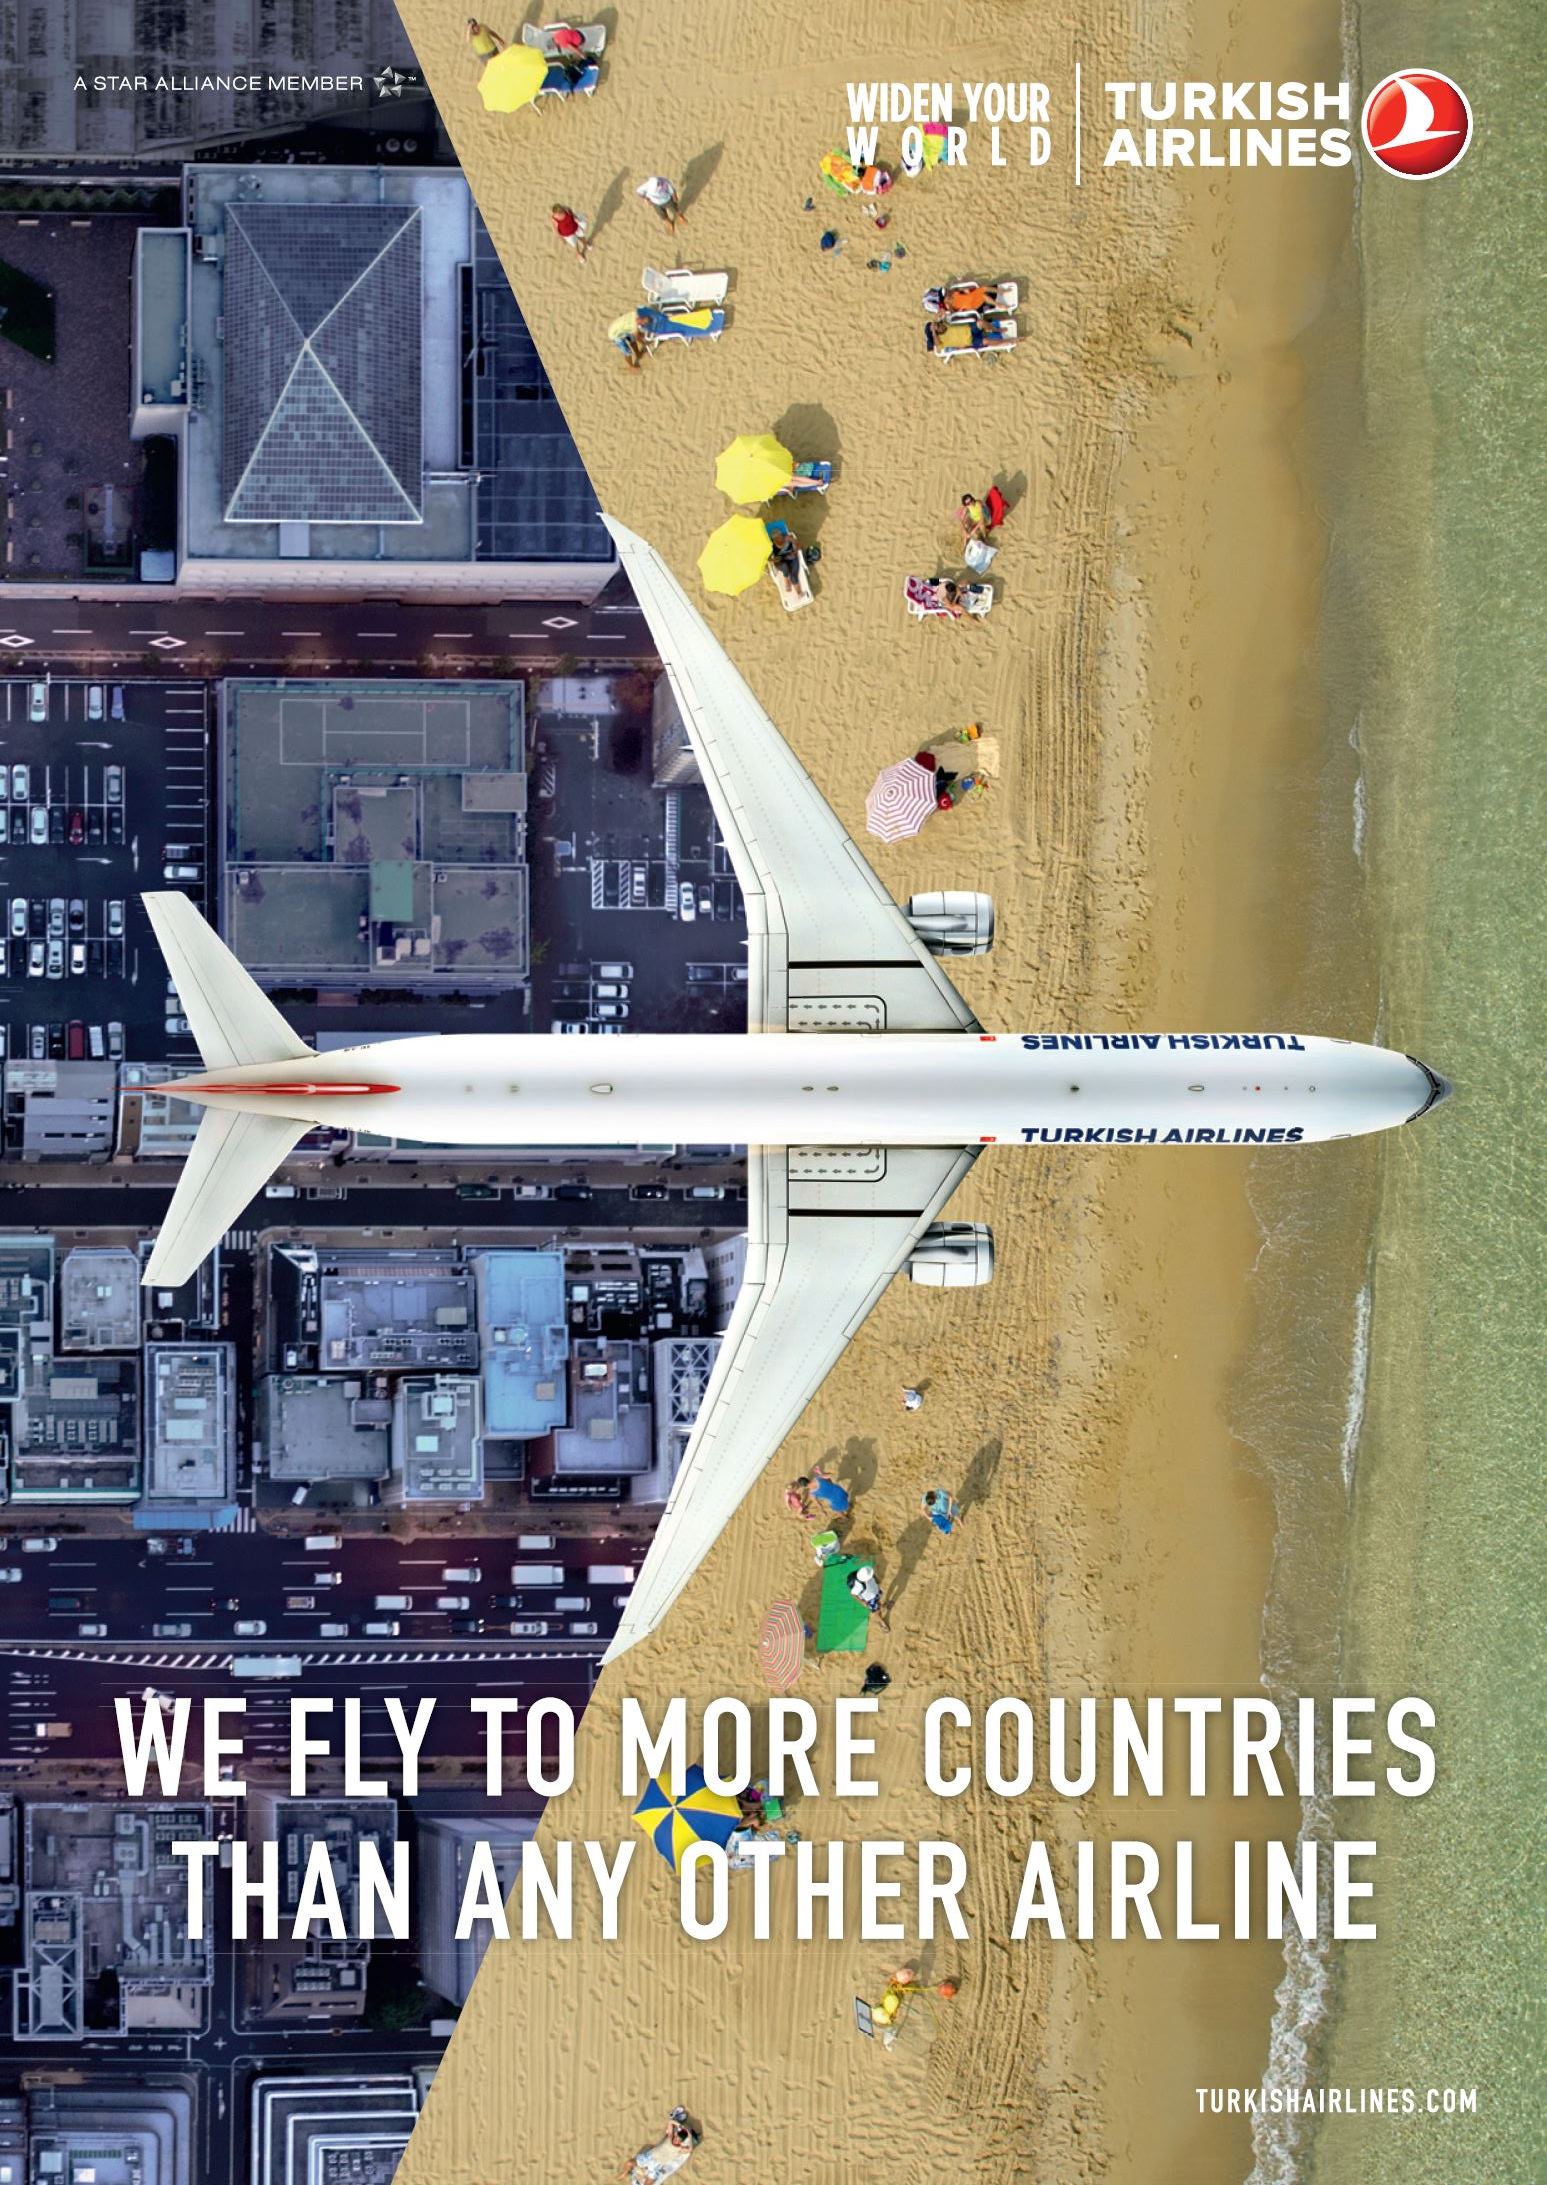 Turkish Airlines: We fly to more countries than any other airline